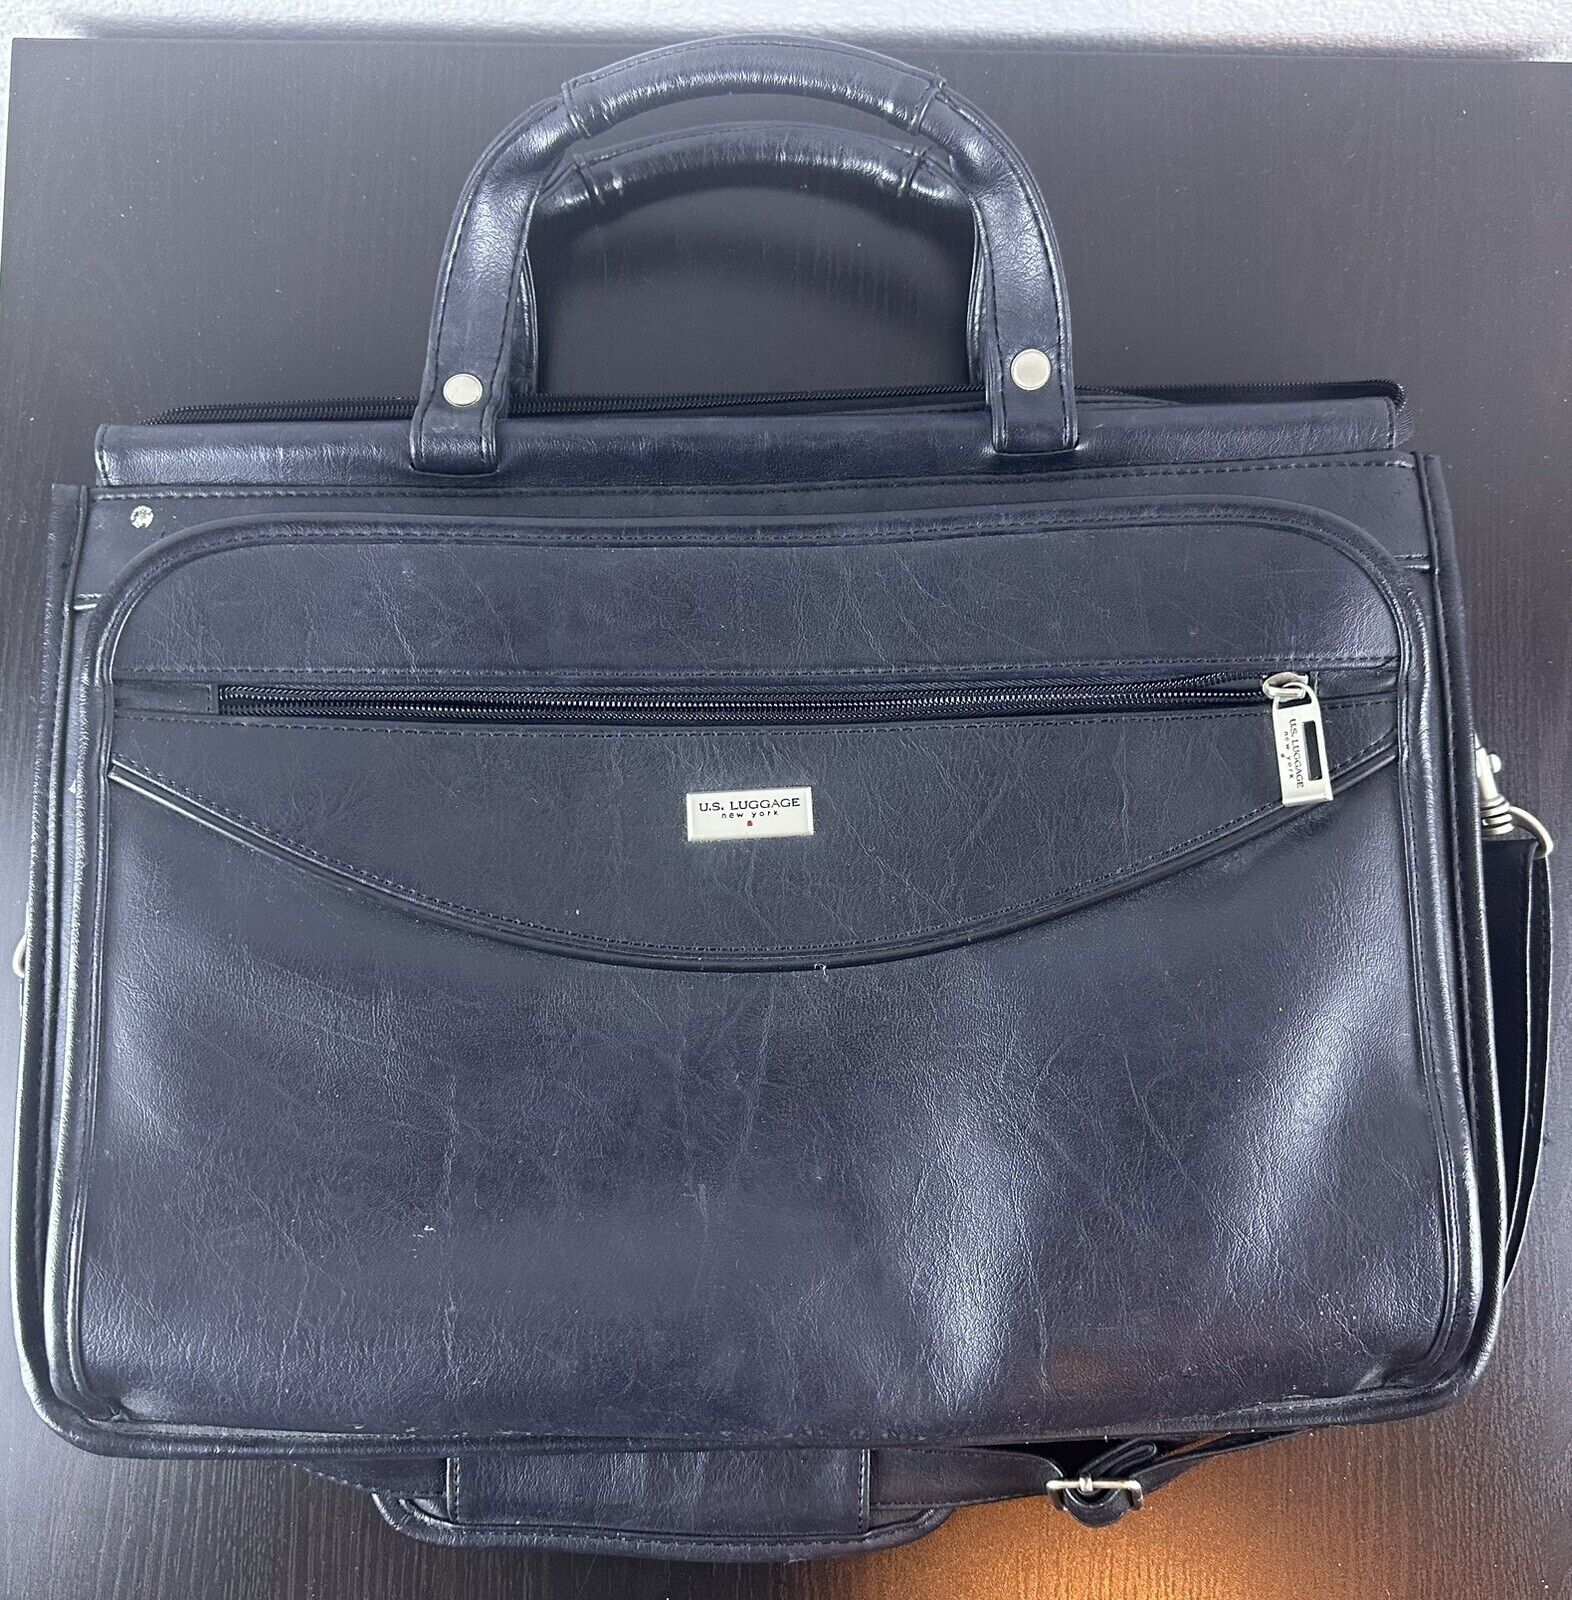 U.S. Luggage New York Black - Briefcase/Laptop/Travel Bag with Retractable Strap